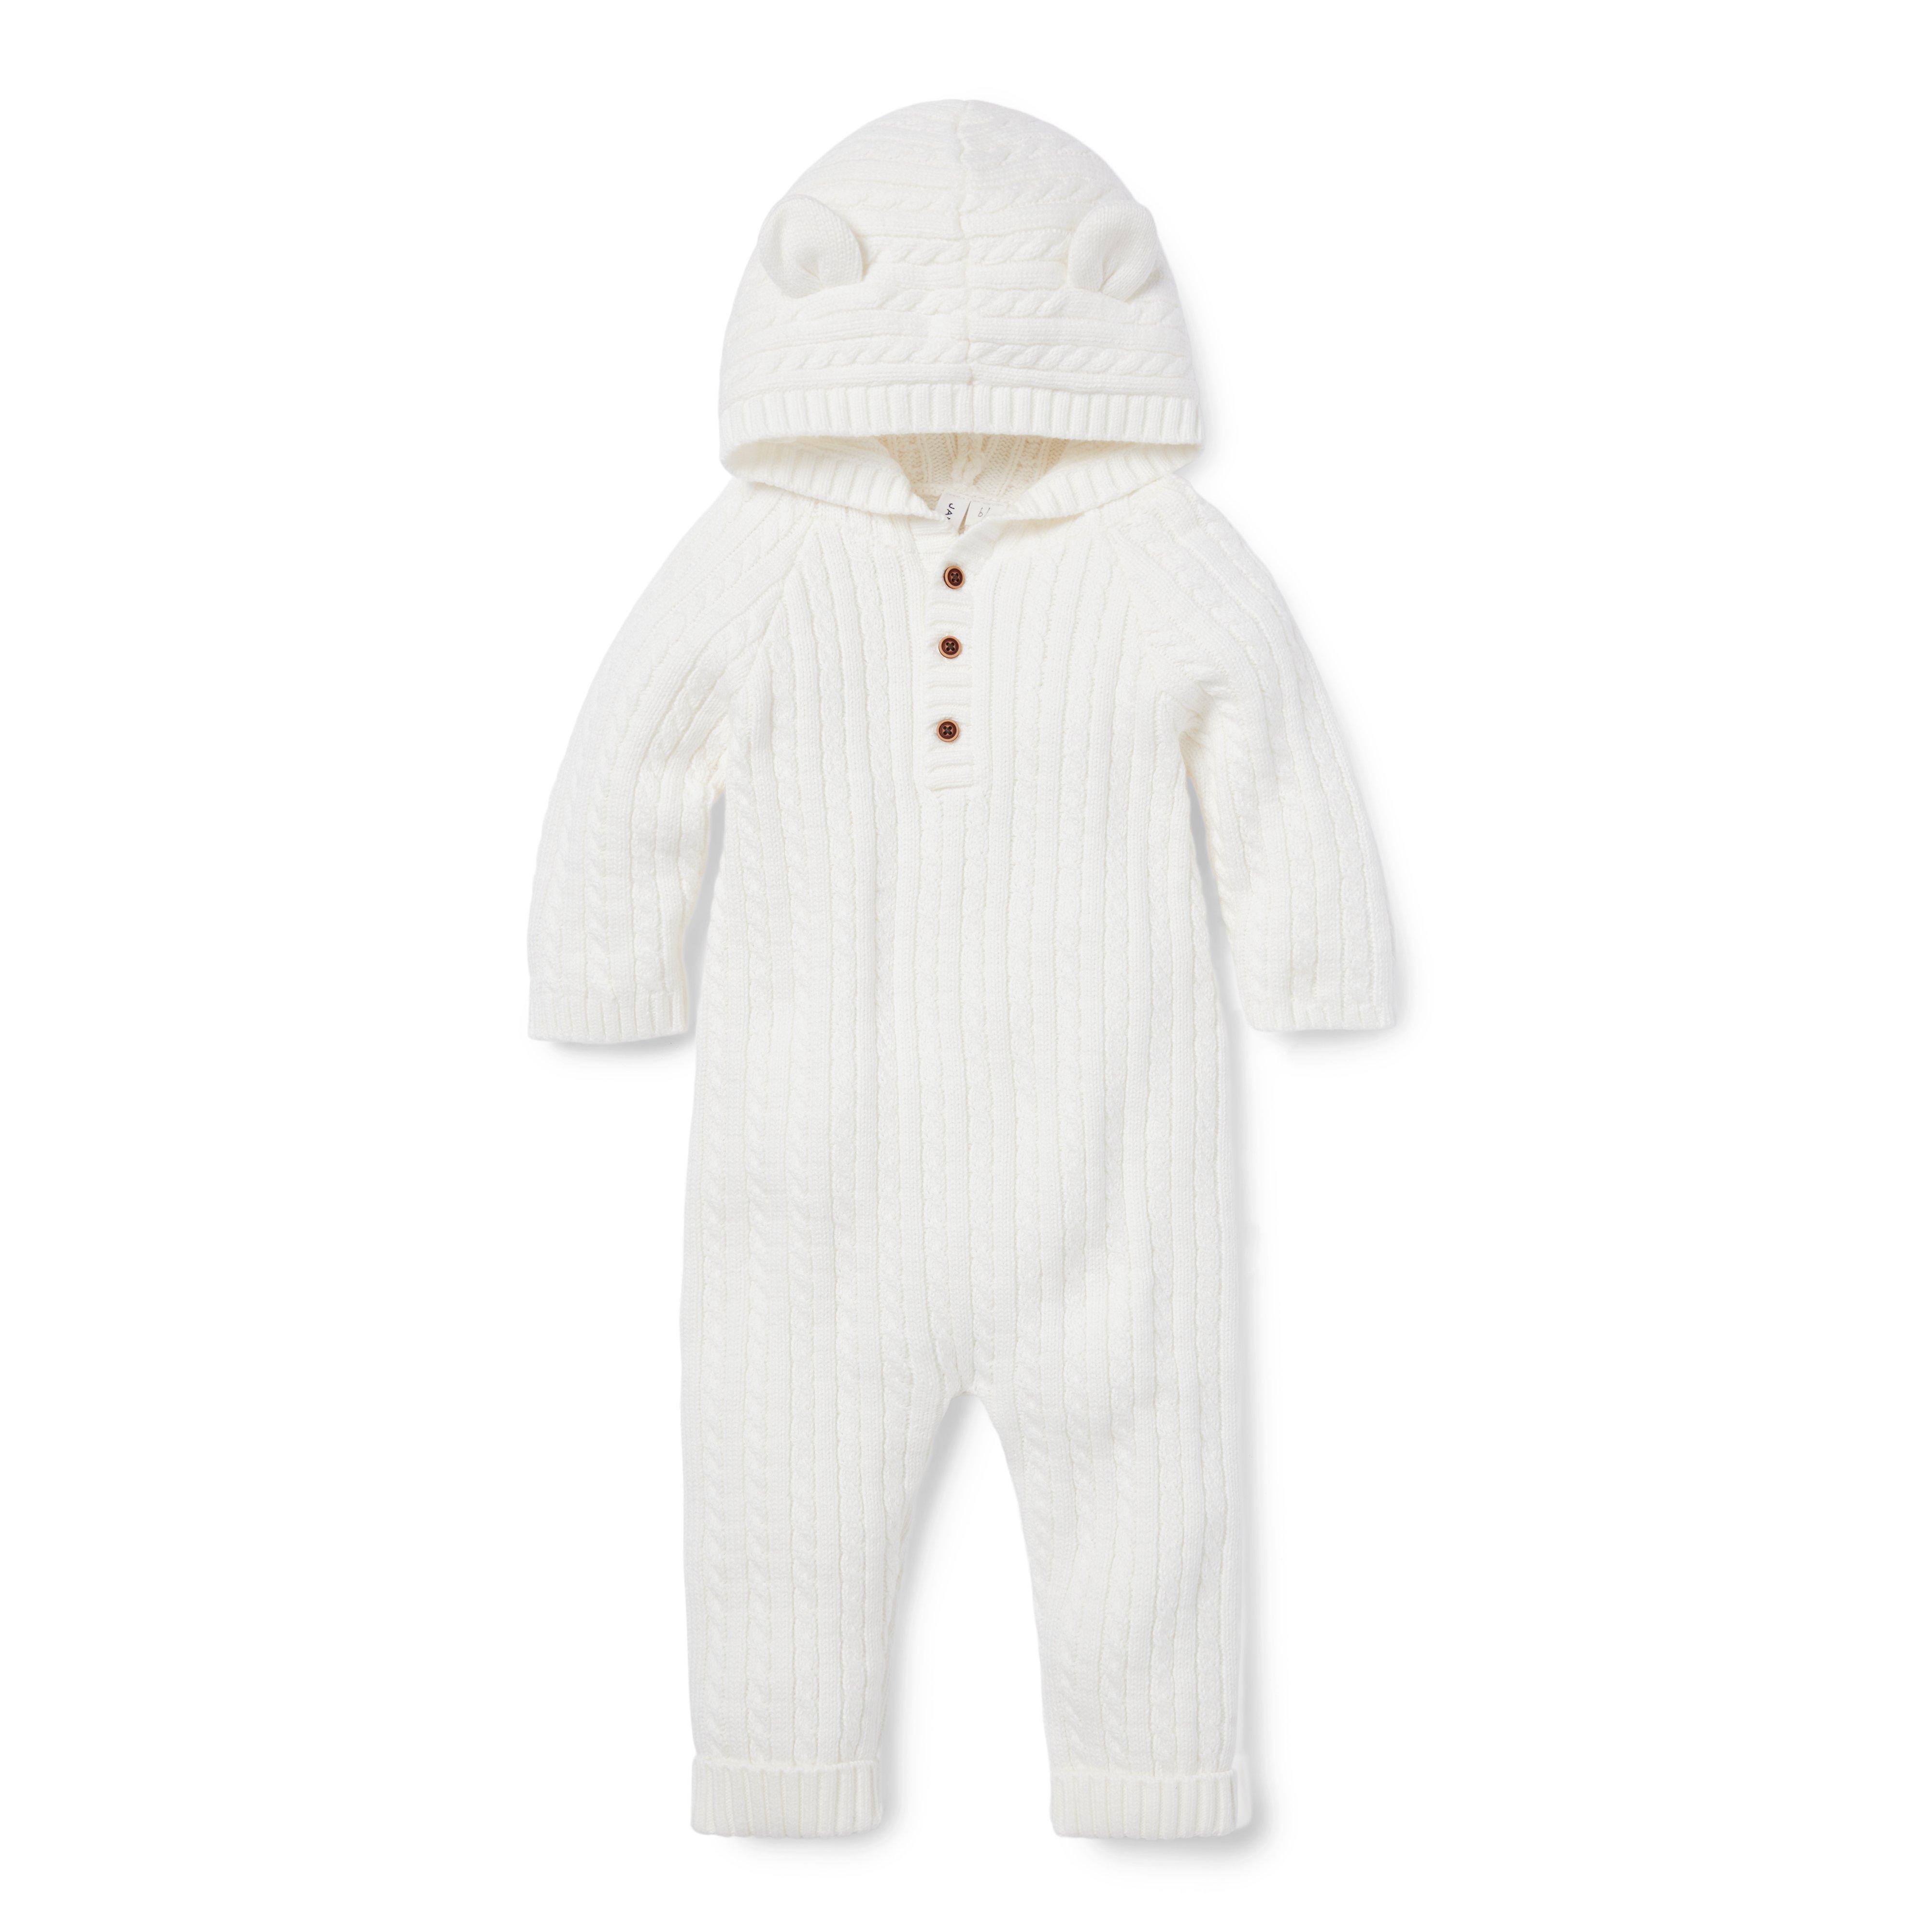 The Cable Knit Bear Ear Baby One Piece